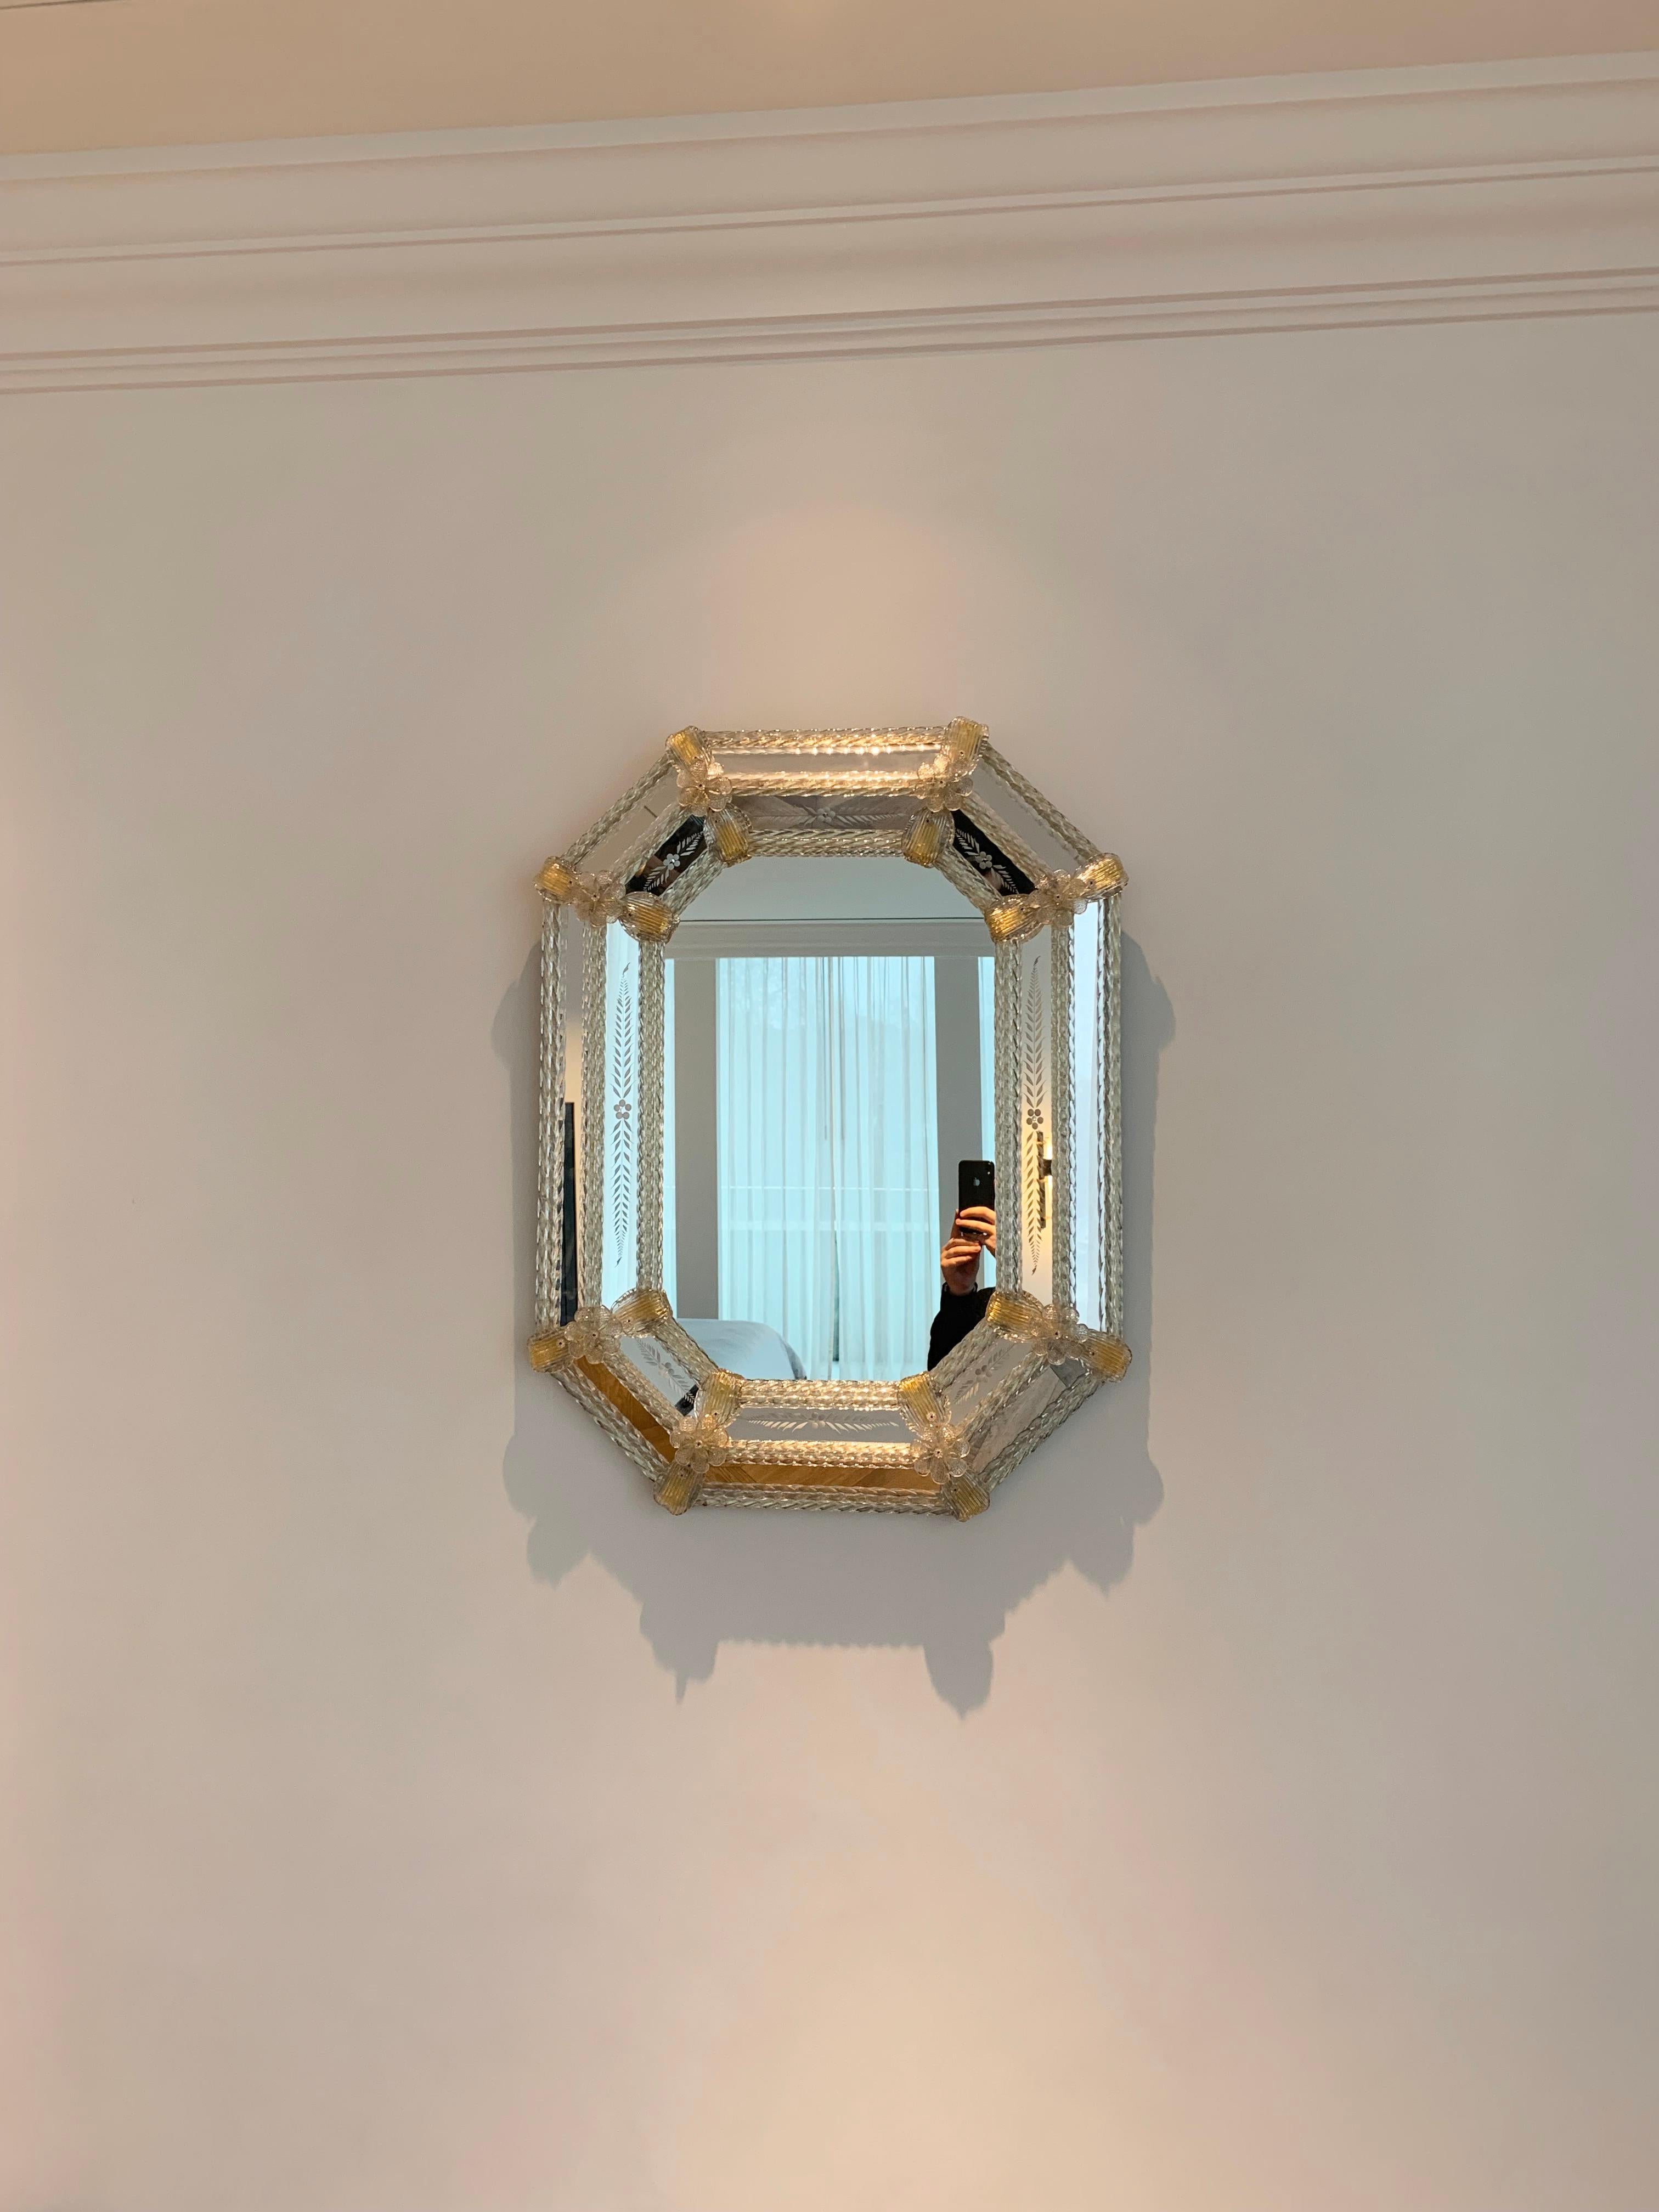 Etched 21st Century, Octagonal Venetian Mirror, Murano Glass, Gold Leaf, Rococo Style